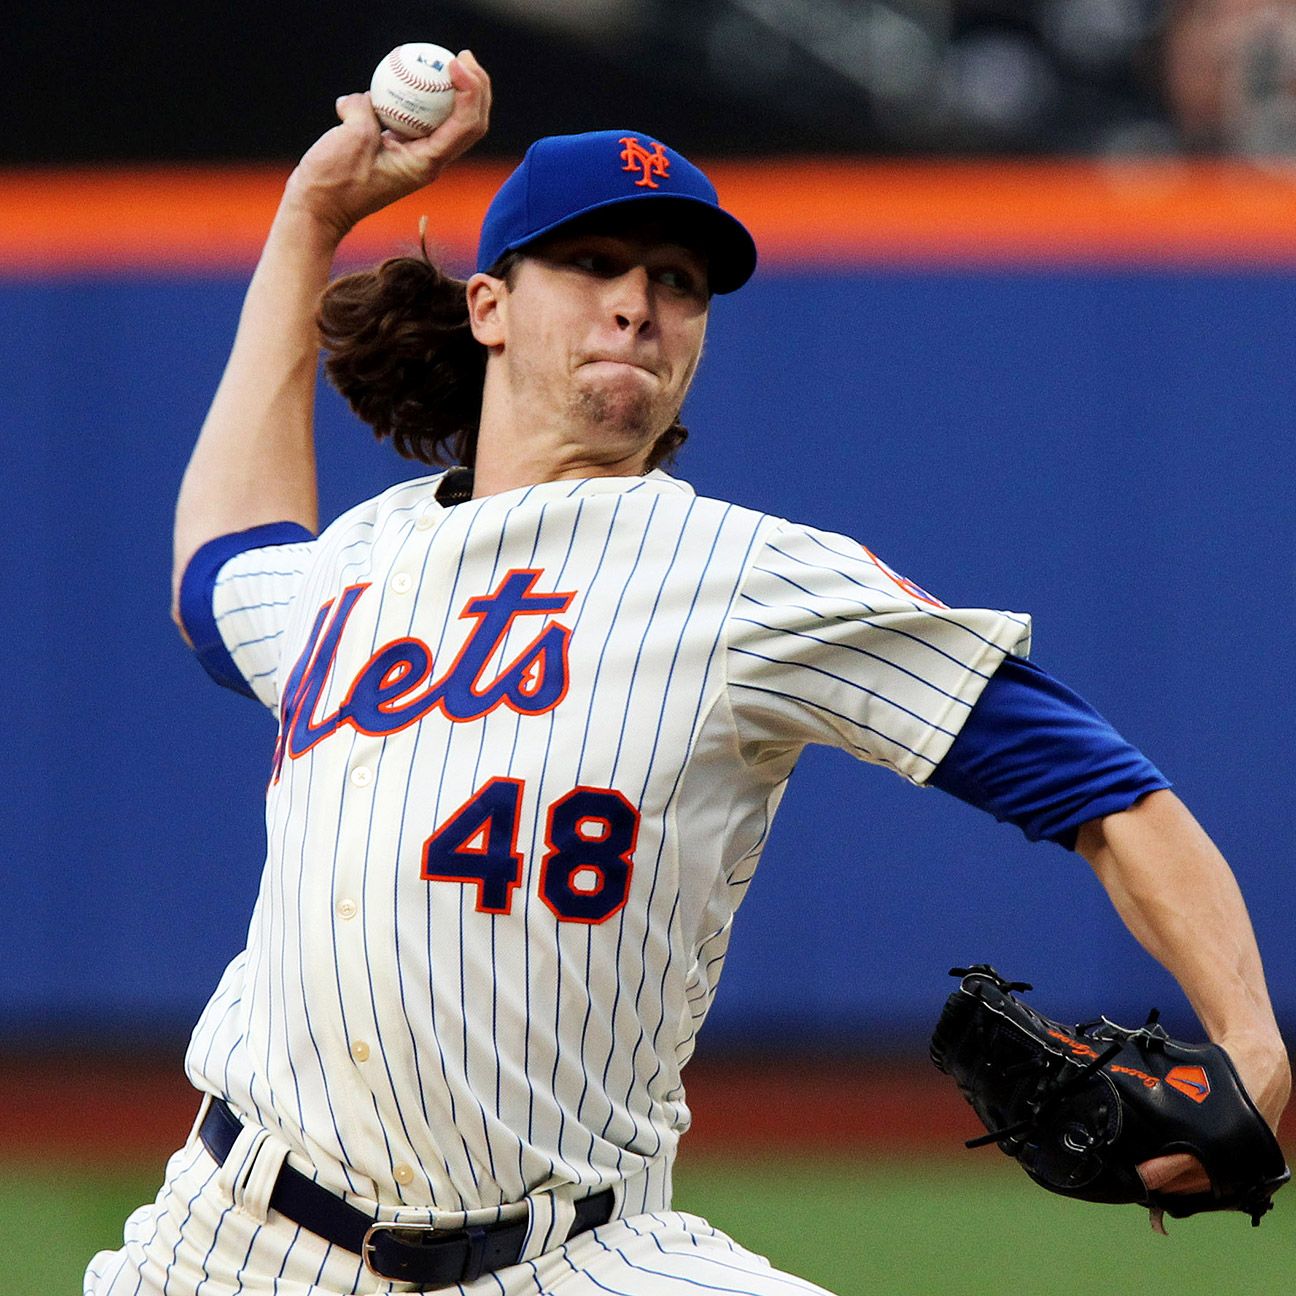 Jacob deGrom of New York Mets placed on DL